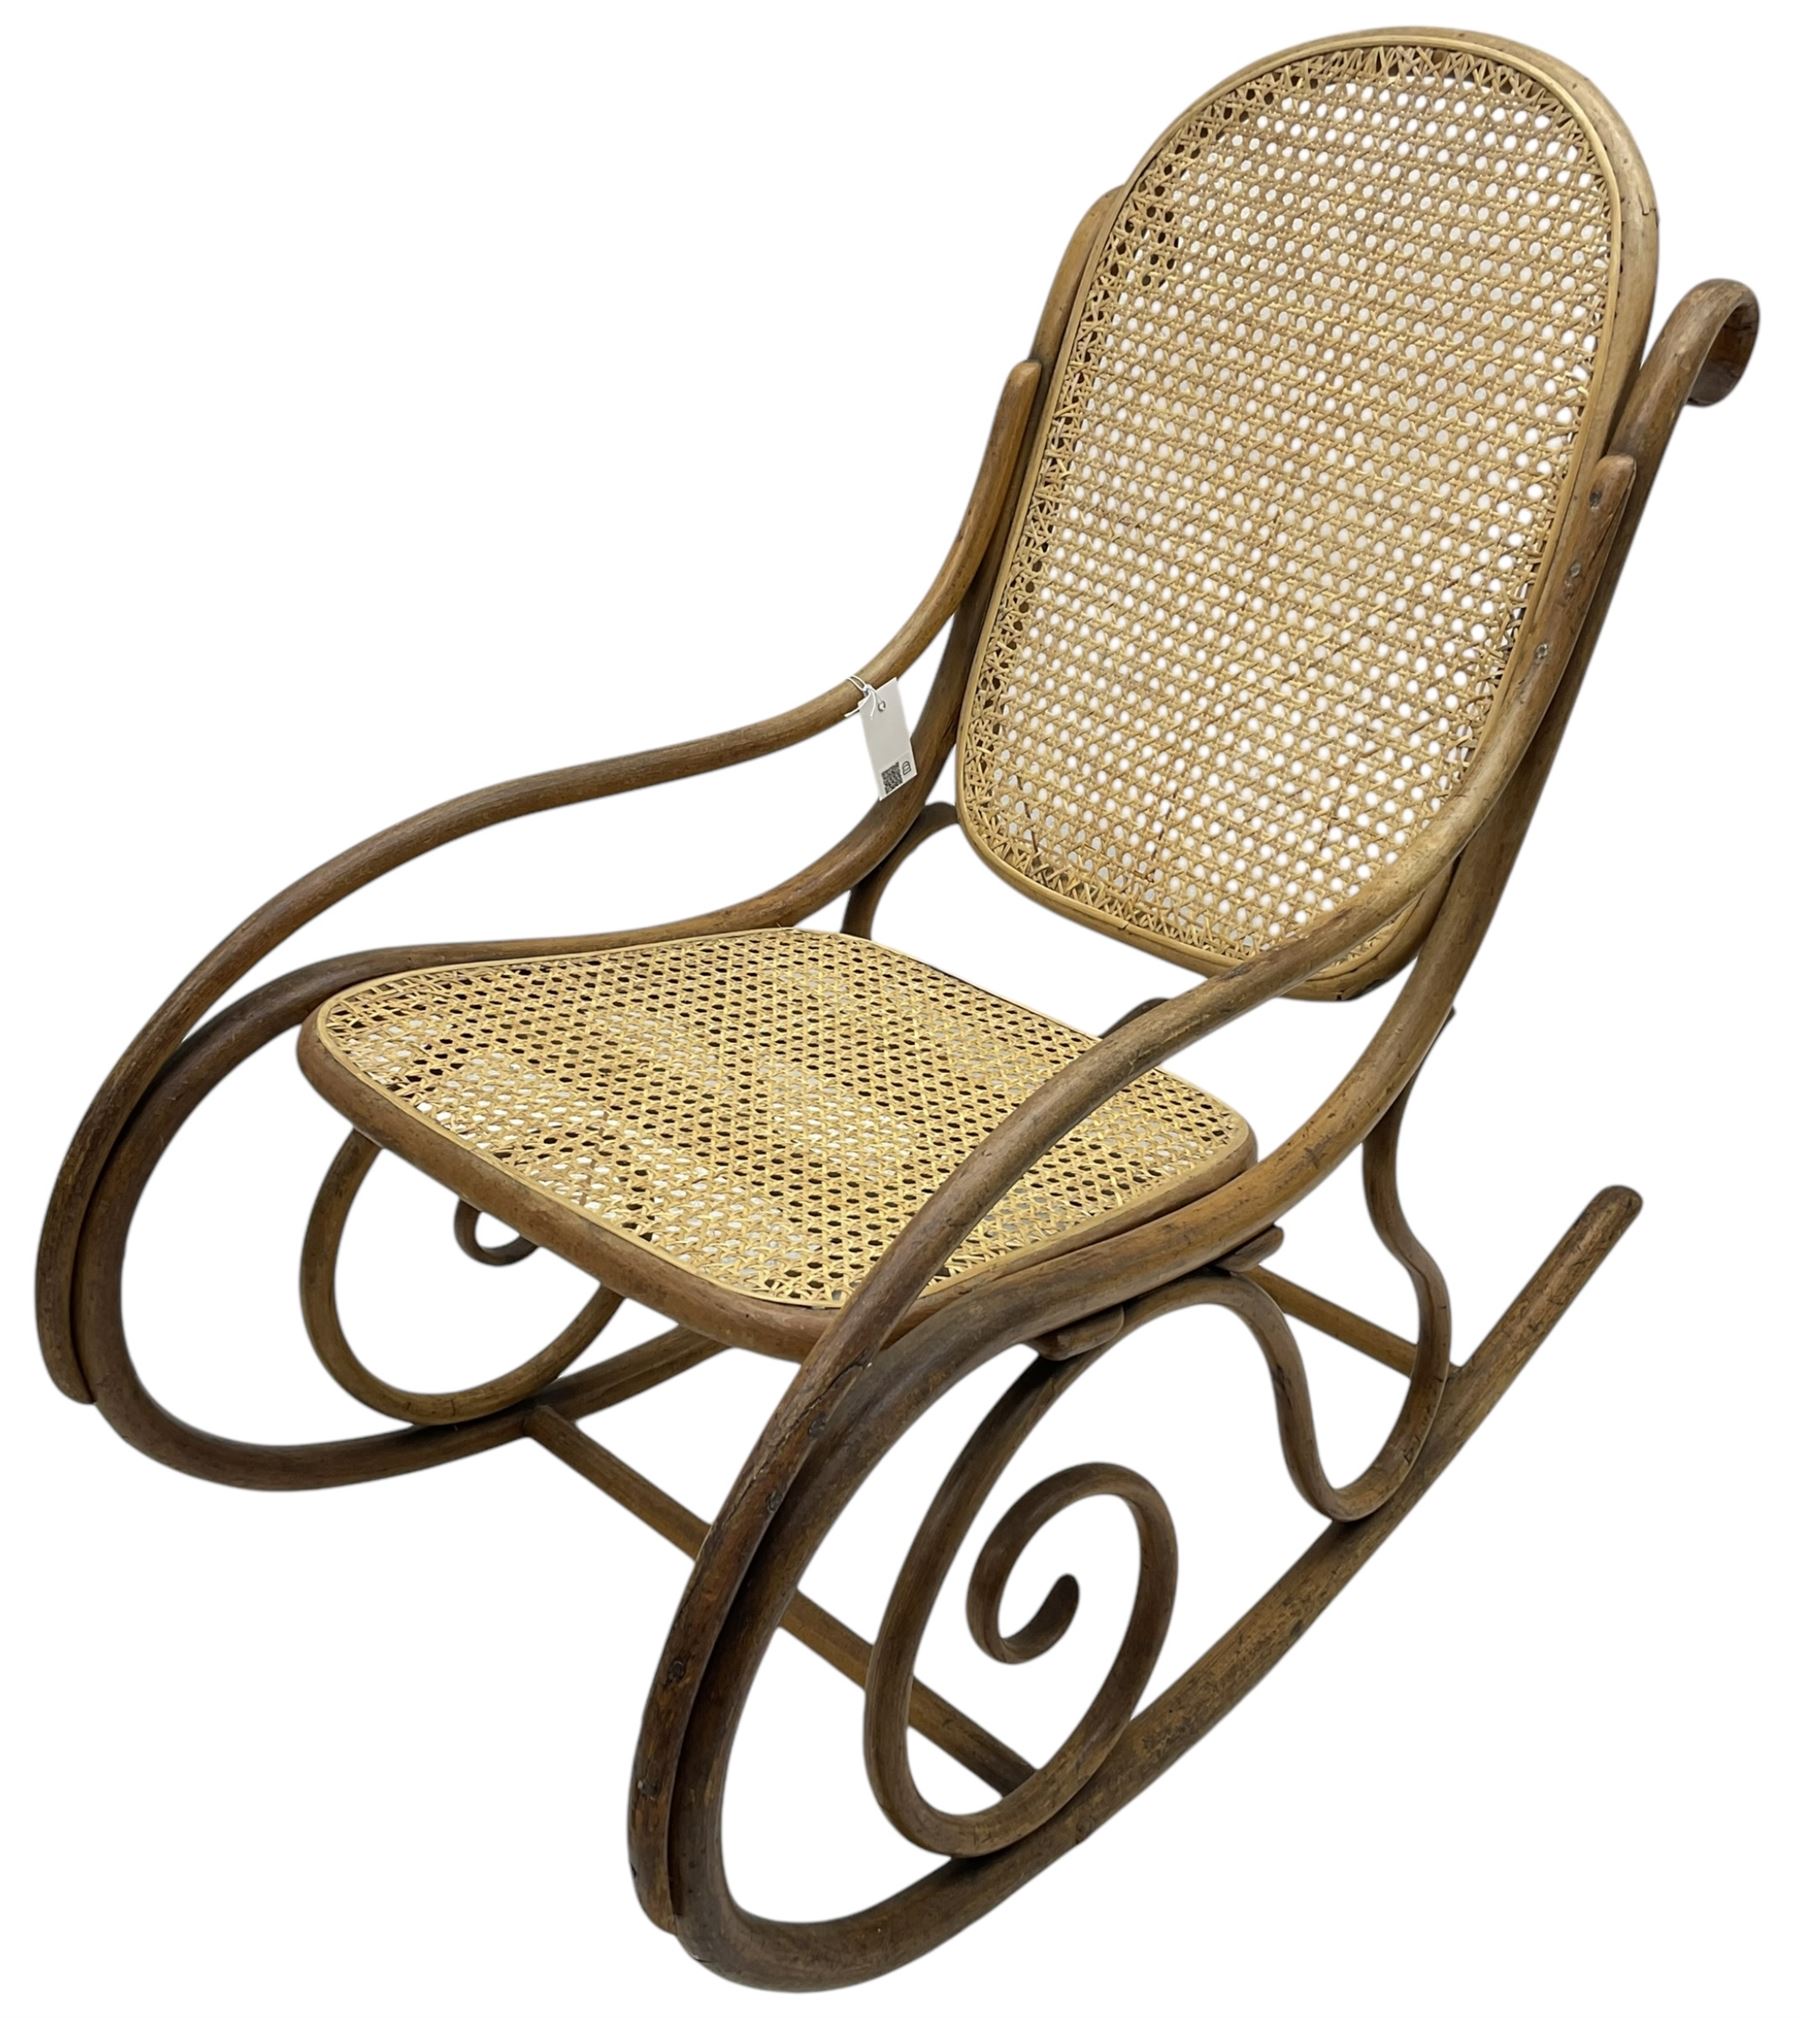 Early 20th century Michael Thonet design bentwood rocking chair - Image 5 of 7